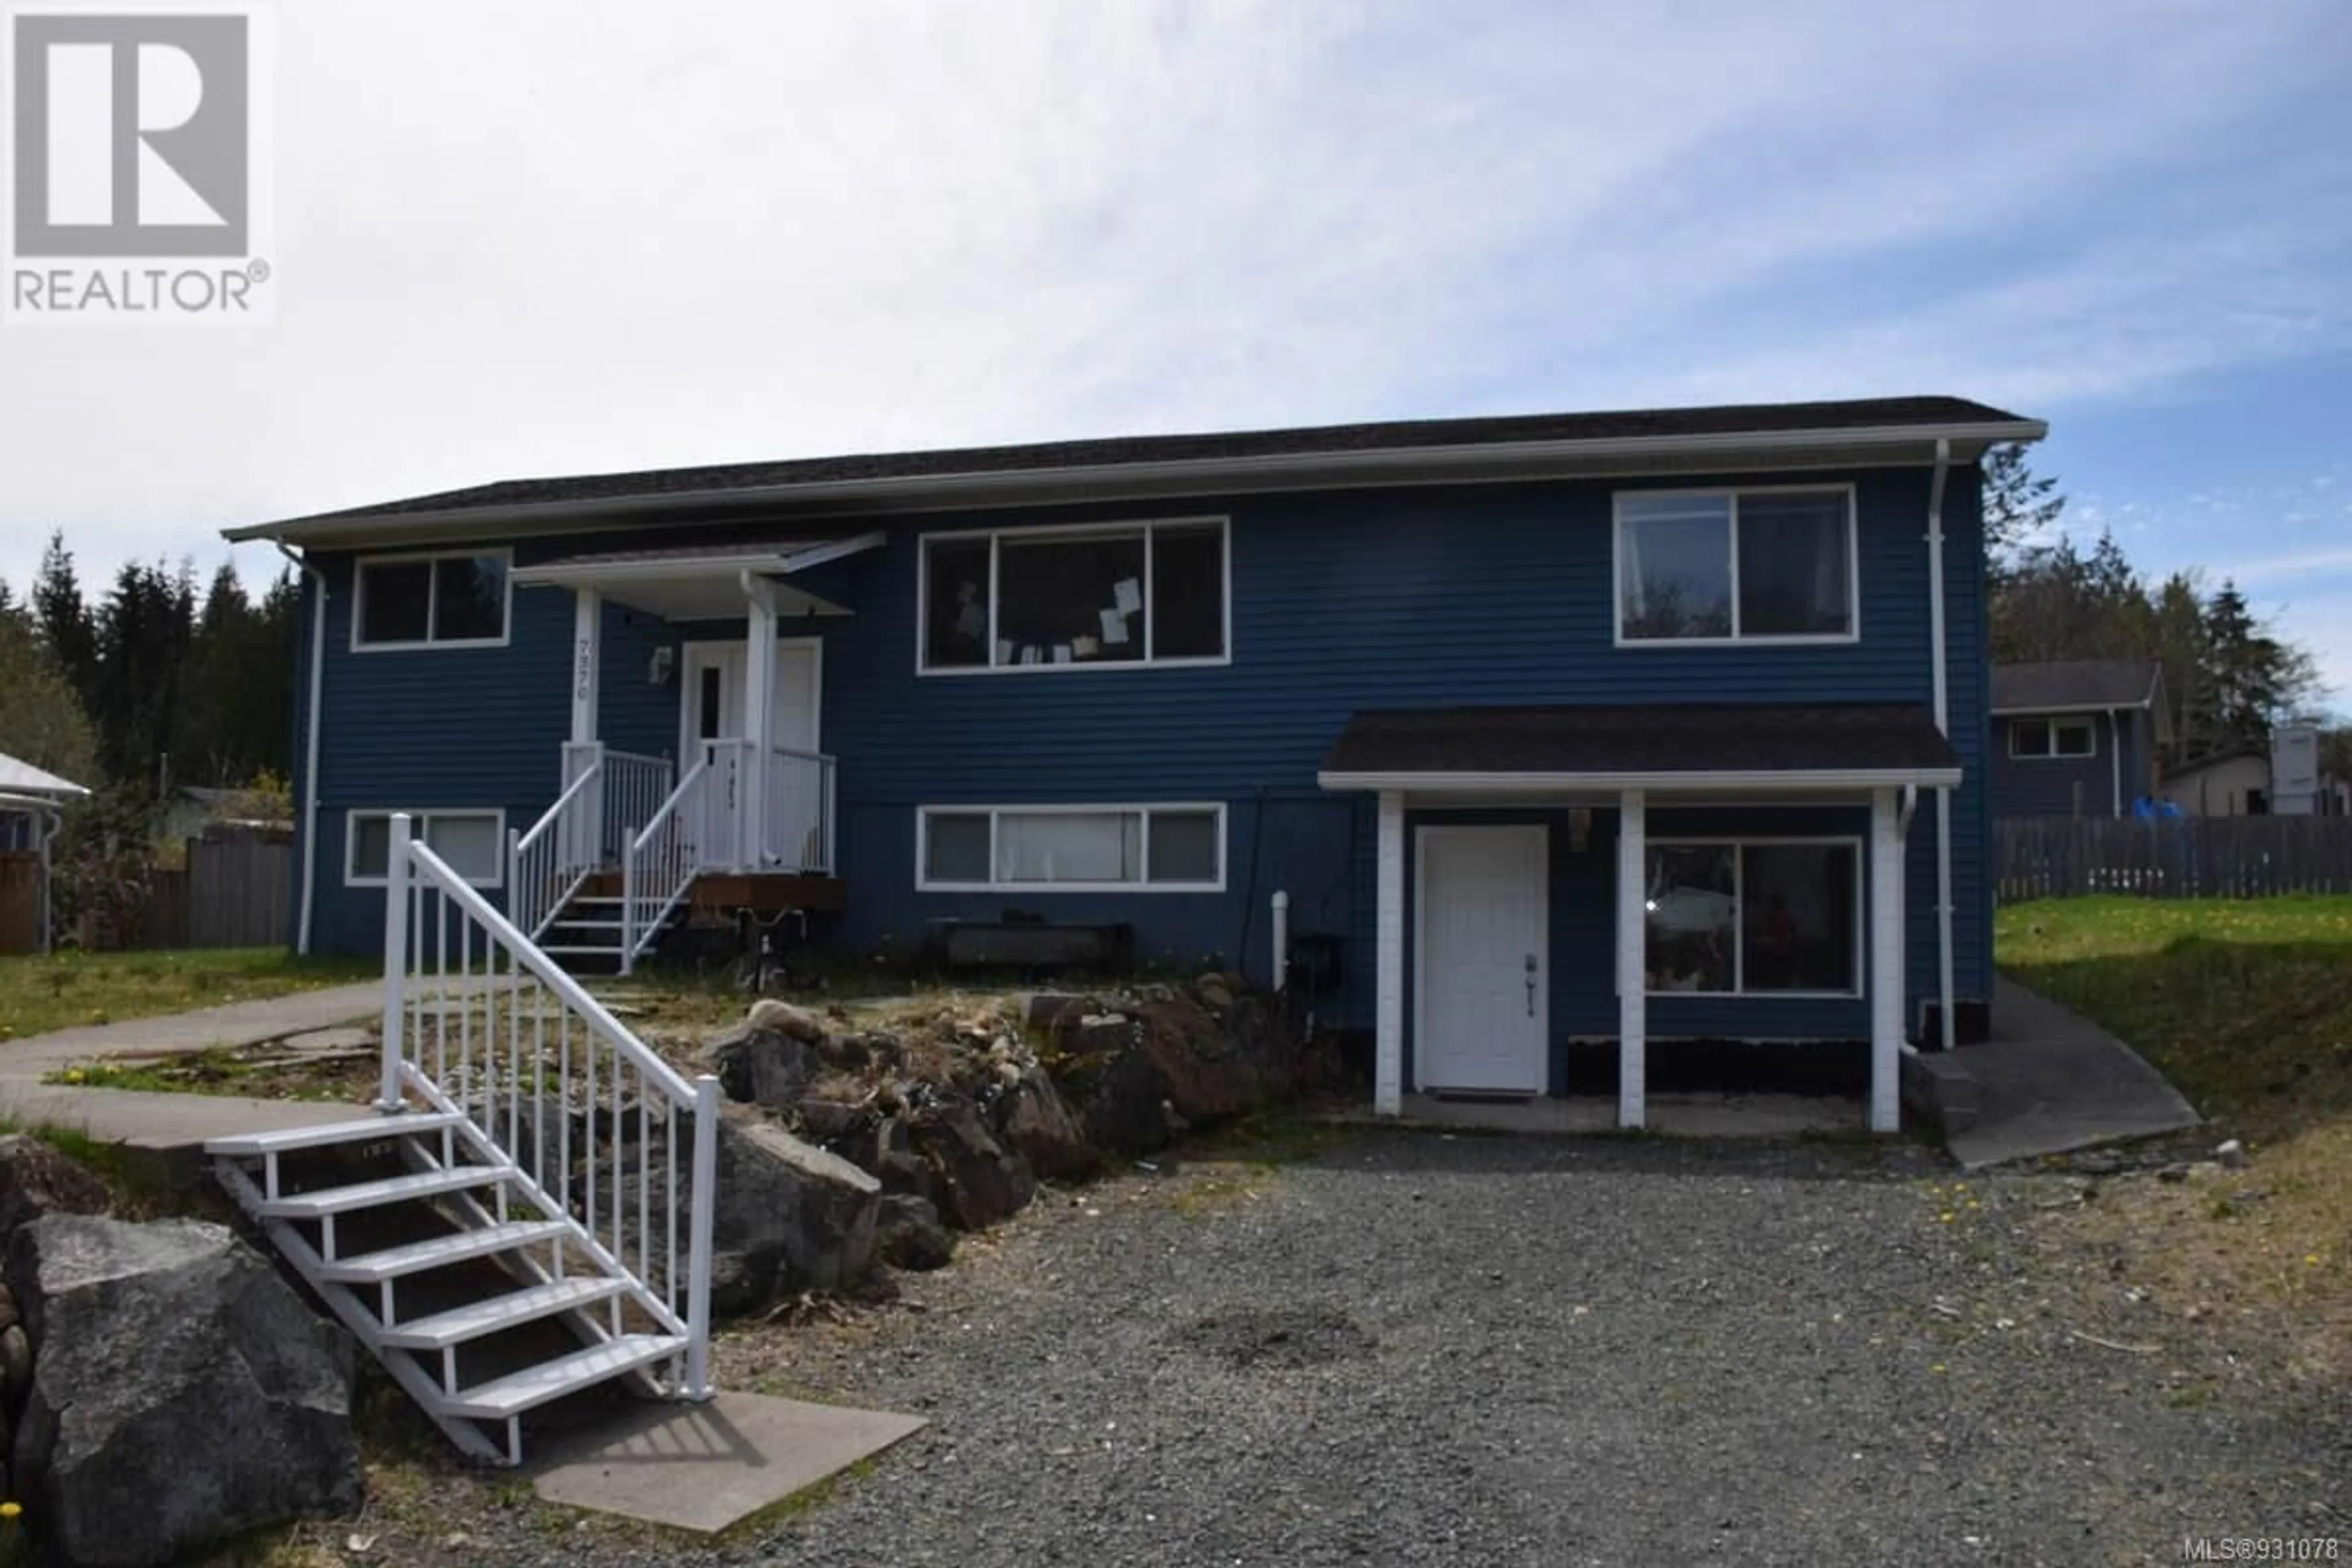 A pic from exterior of the house or condo for 7370 Thunderbird Way, Port Hardy British Columbia V0N2P0